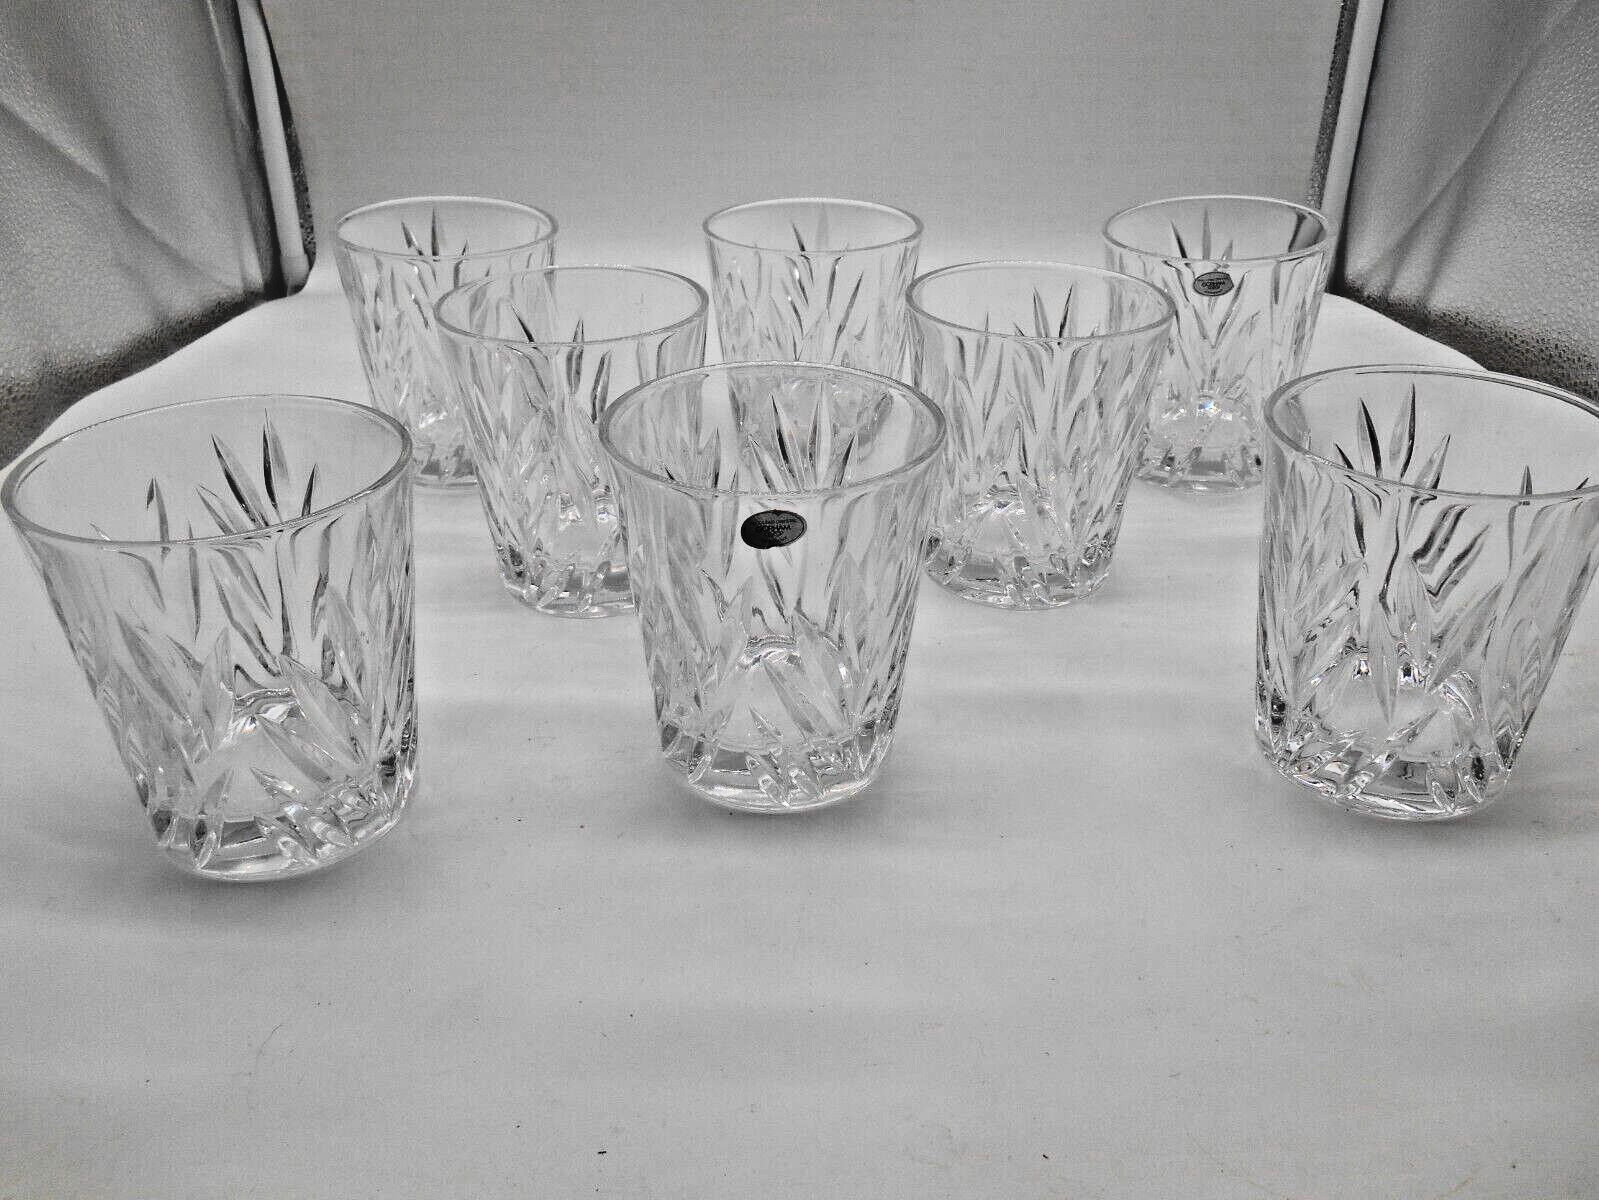 2 Gorham Star Blossom Crystal 10 oz. Double Old Fashion or Whiskey Tumblers